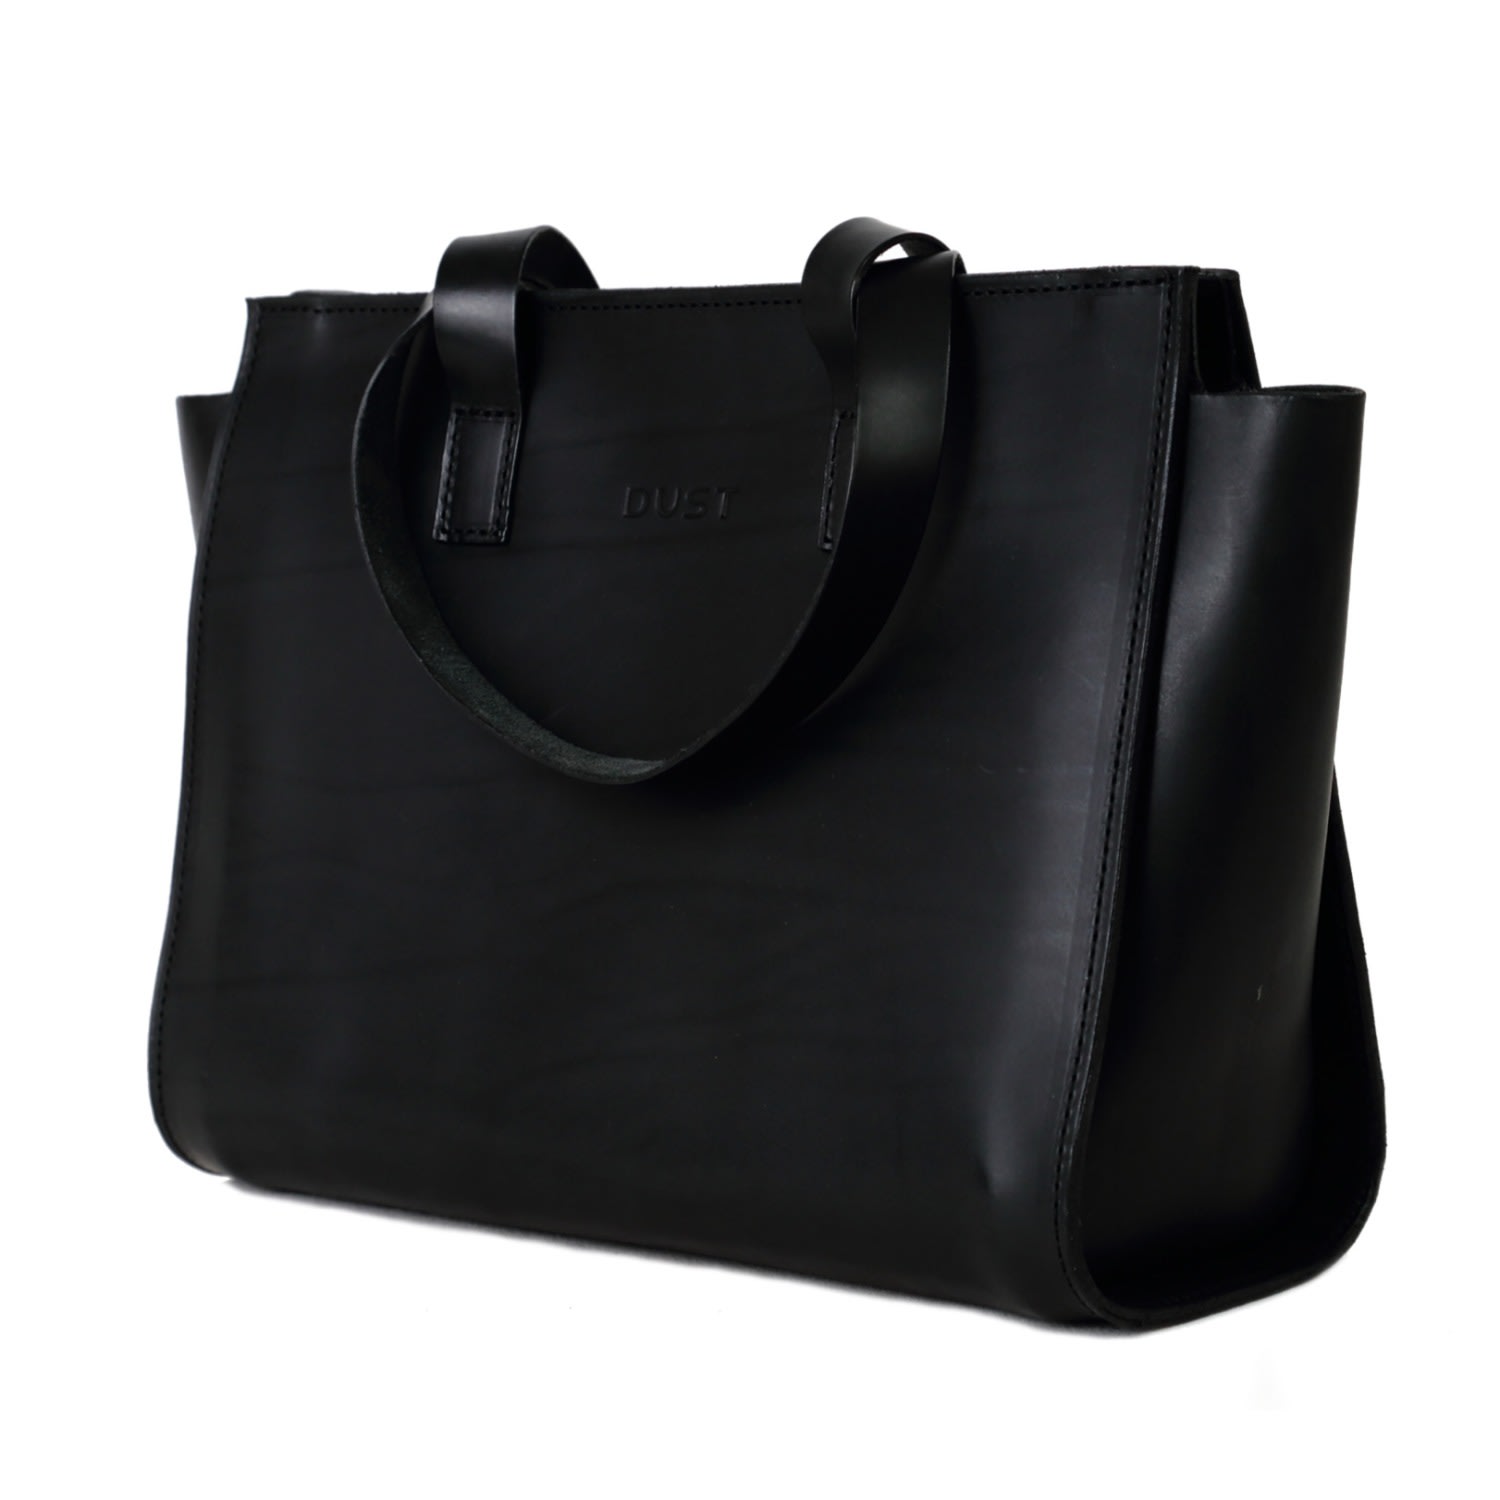 The Dust Company Women's Leather Shoulder Bag In Cuoio Black